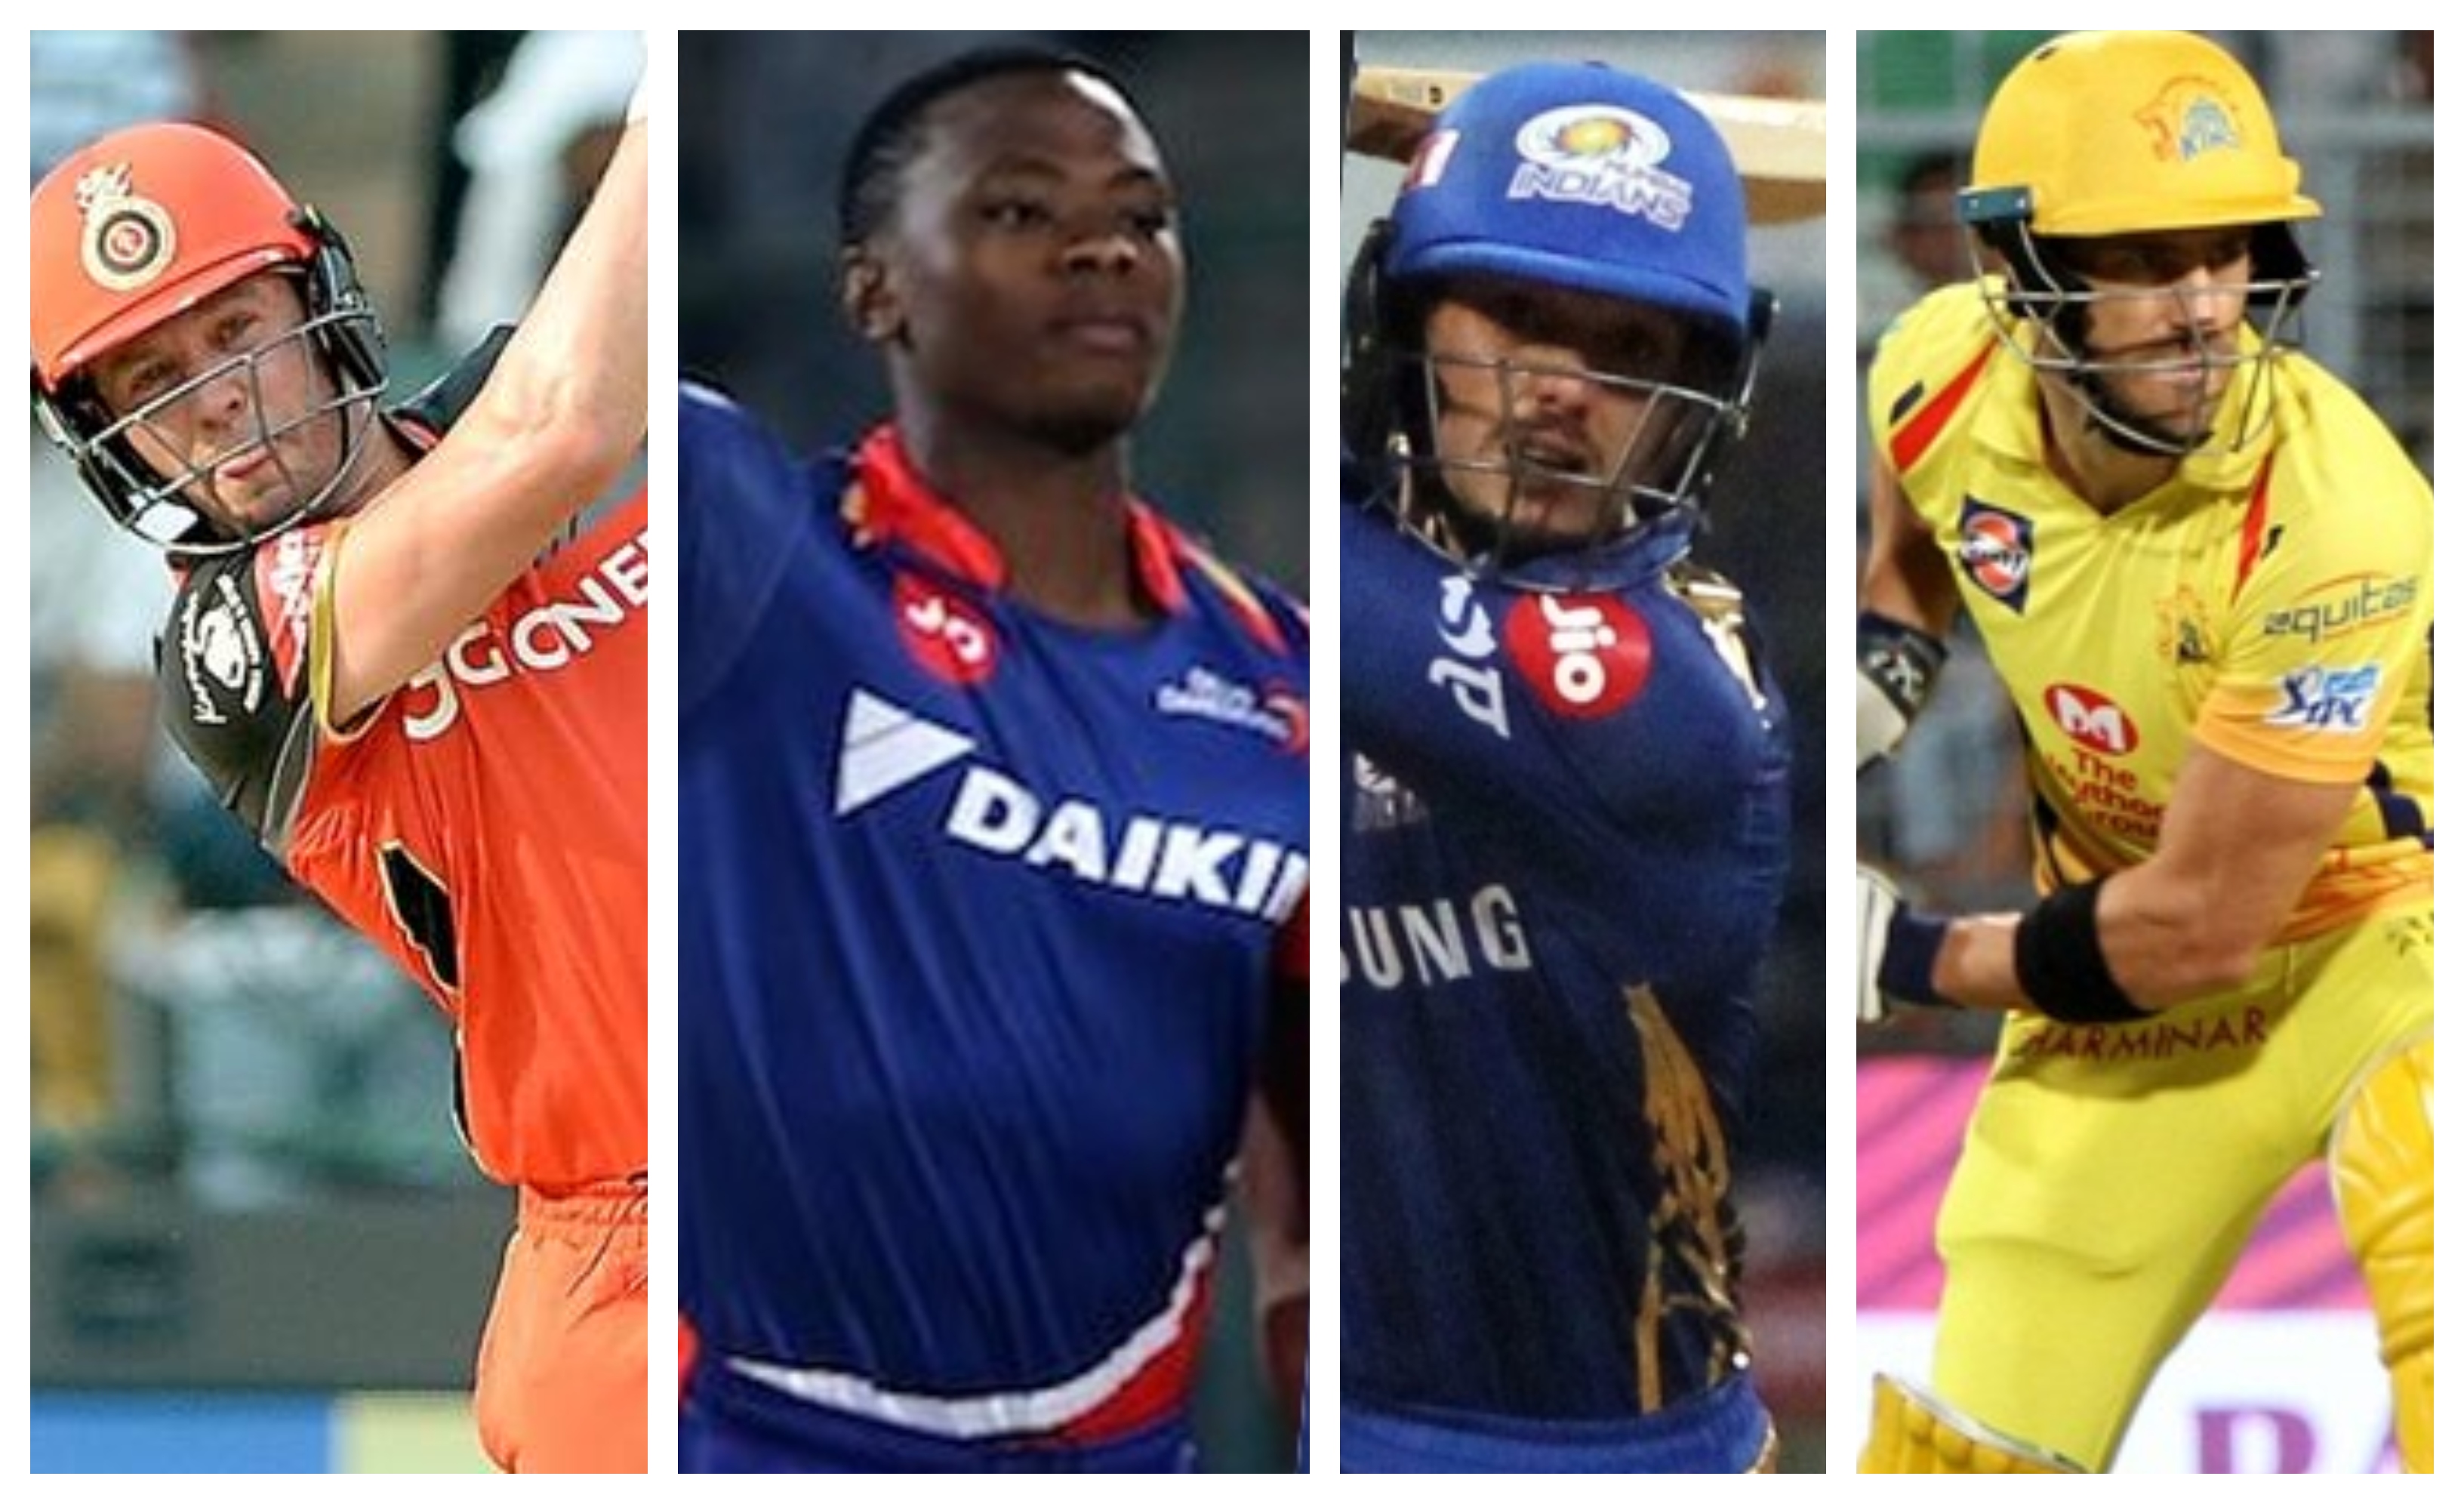 South African cricket stars will be seen in action during the IPL 2020 edition